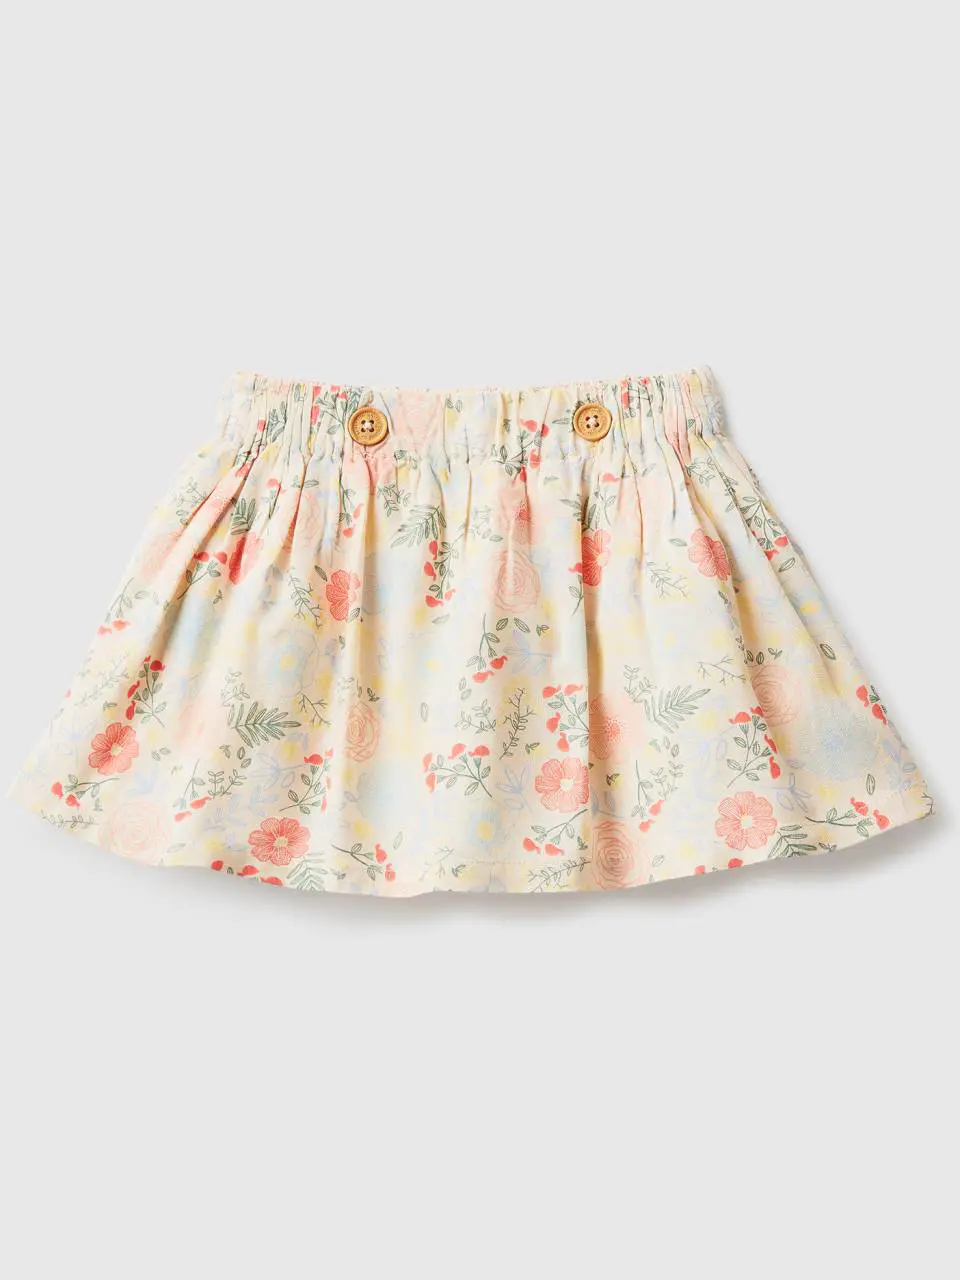 Benetton floral skirt in sustainable viscose. 1